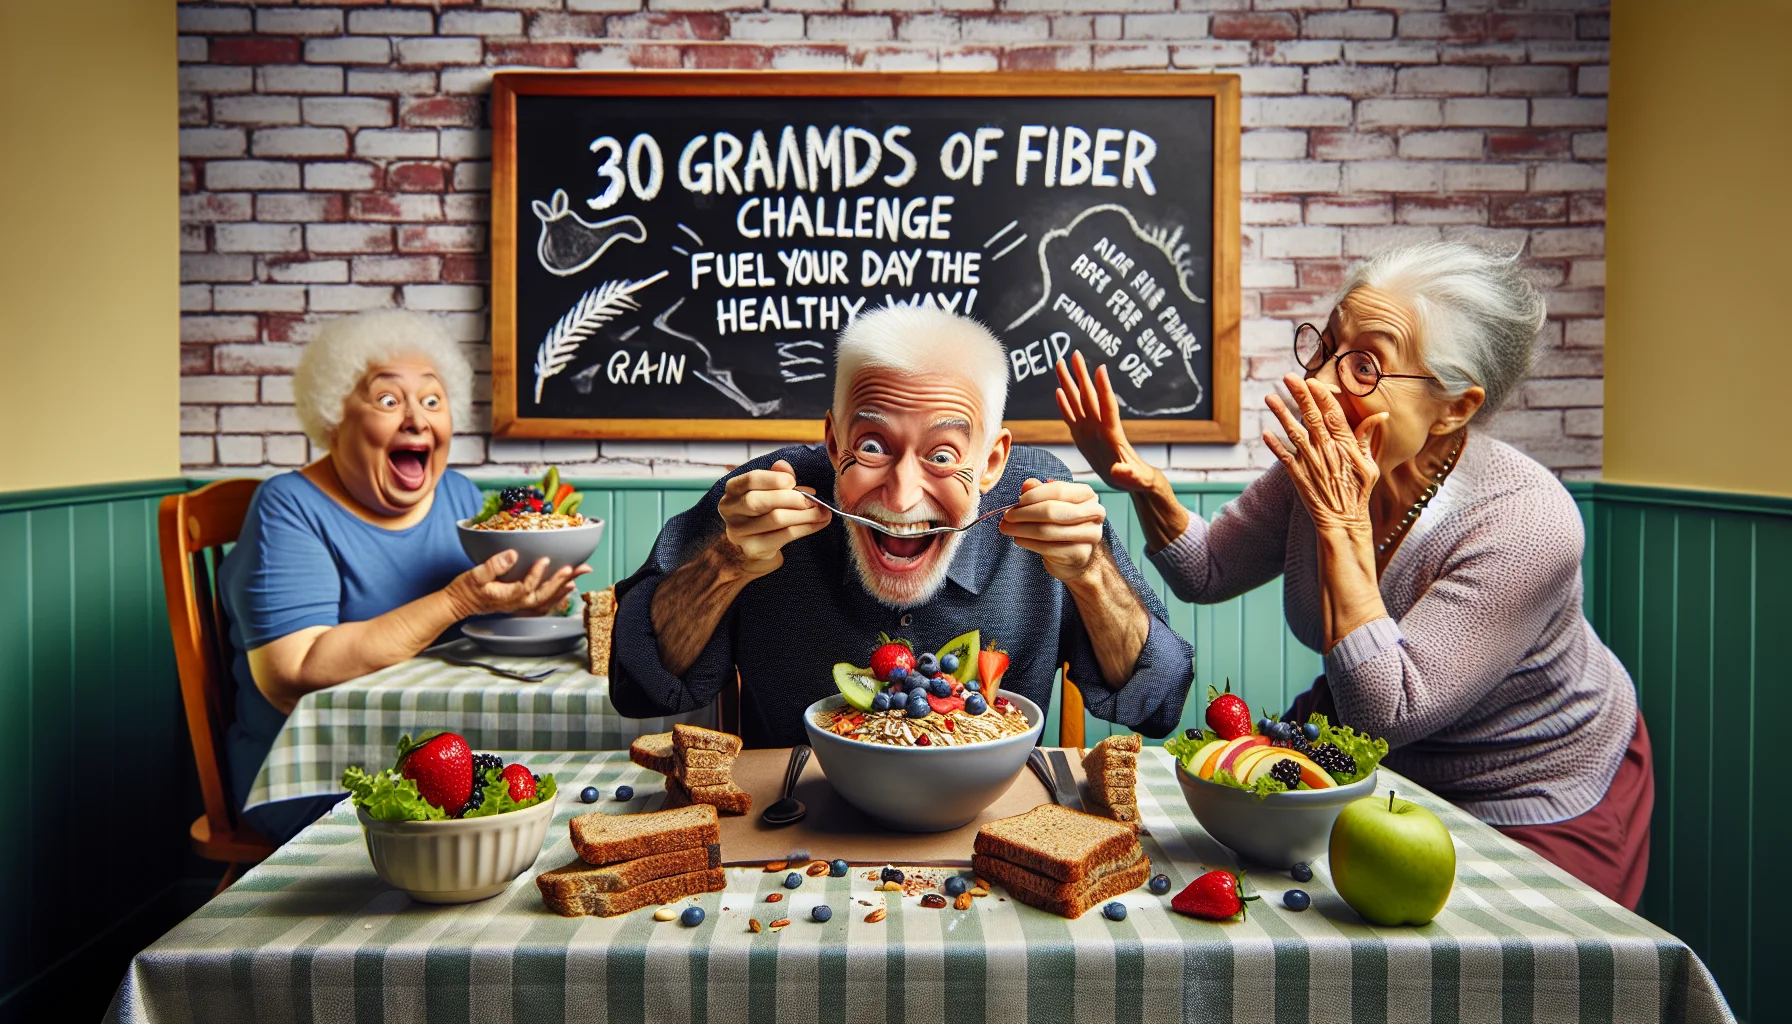 Create a humorous and lifelike image depicting a dining scene at an elderly community center. The menu for the day is focused on high-fiber foods, filled with things like fresh fruits, grains, and vegetables. In the foreground, one playful, cheerful Caucasian senior man is overly excited about his bowl of fiber-packed oatmeal embellished with vibrant strawberries, blueberries and nuts. A Hispanic elderly woman at the same table humorously reaches over to steal a piece of grain bread from her neighbour's plate, a Black senior woman who is enjoying her 'fiber-rich' salad with a surprised expression. The wall behind them features a chalk-written sign proclaiming '30 grams of fiber challenge, fuel your day the healthy way!'